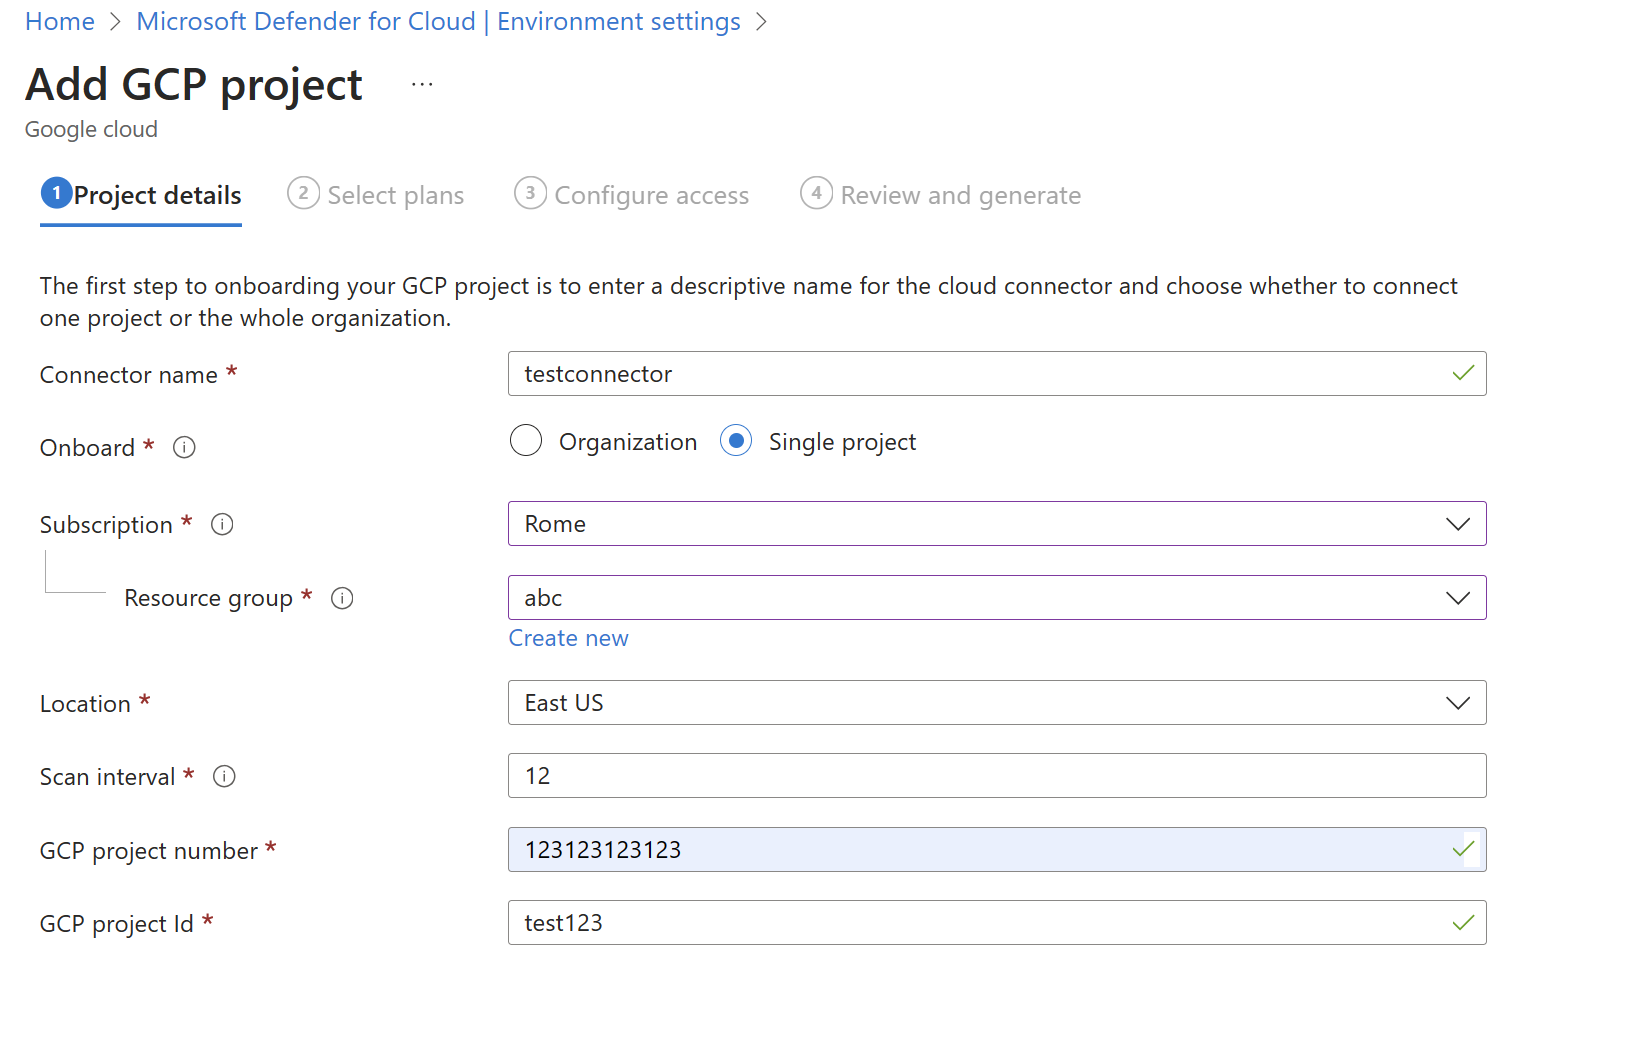 Screenshot of the form to fill in the account details for a GCP environment in Microsoft Defender for Cloud.